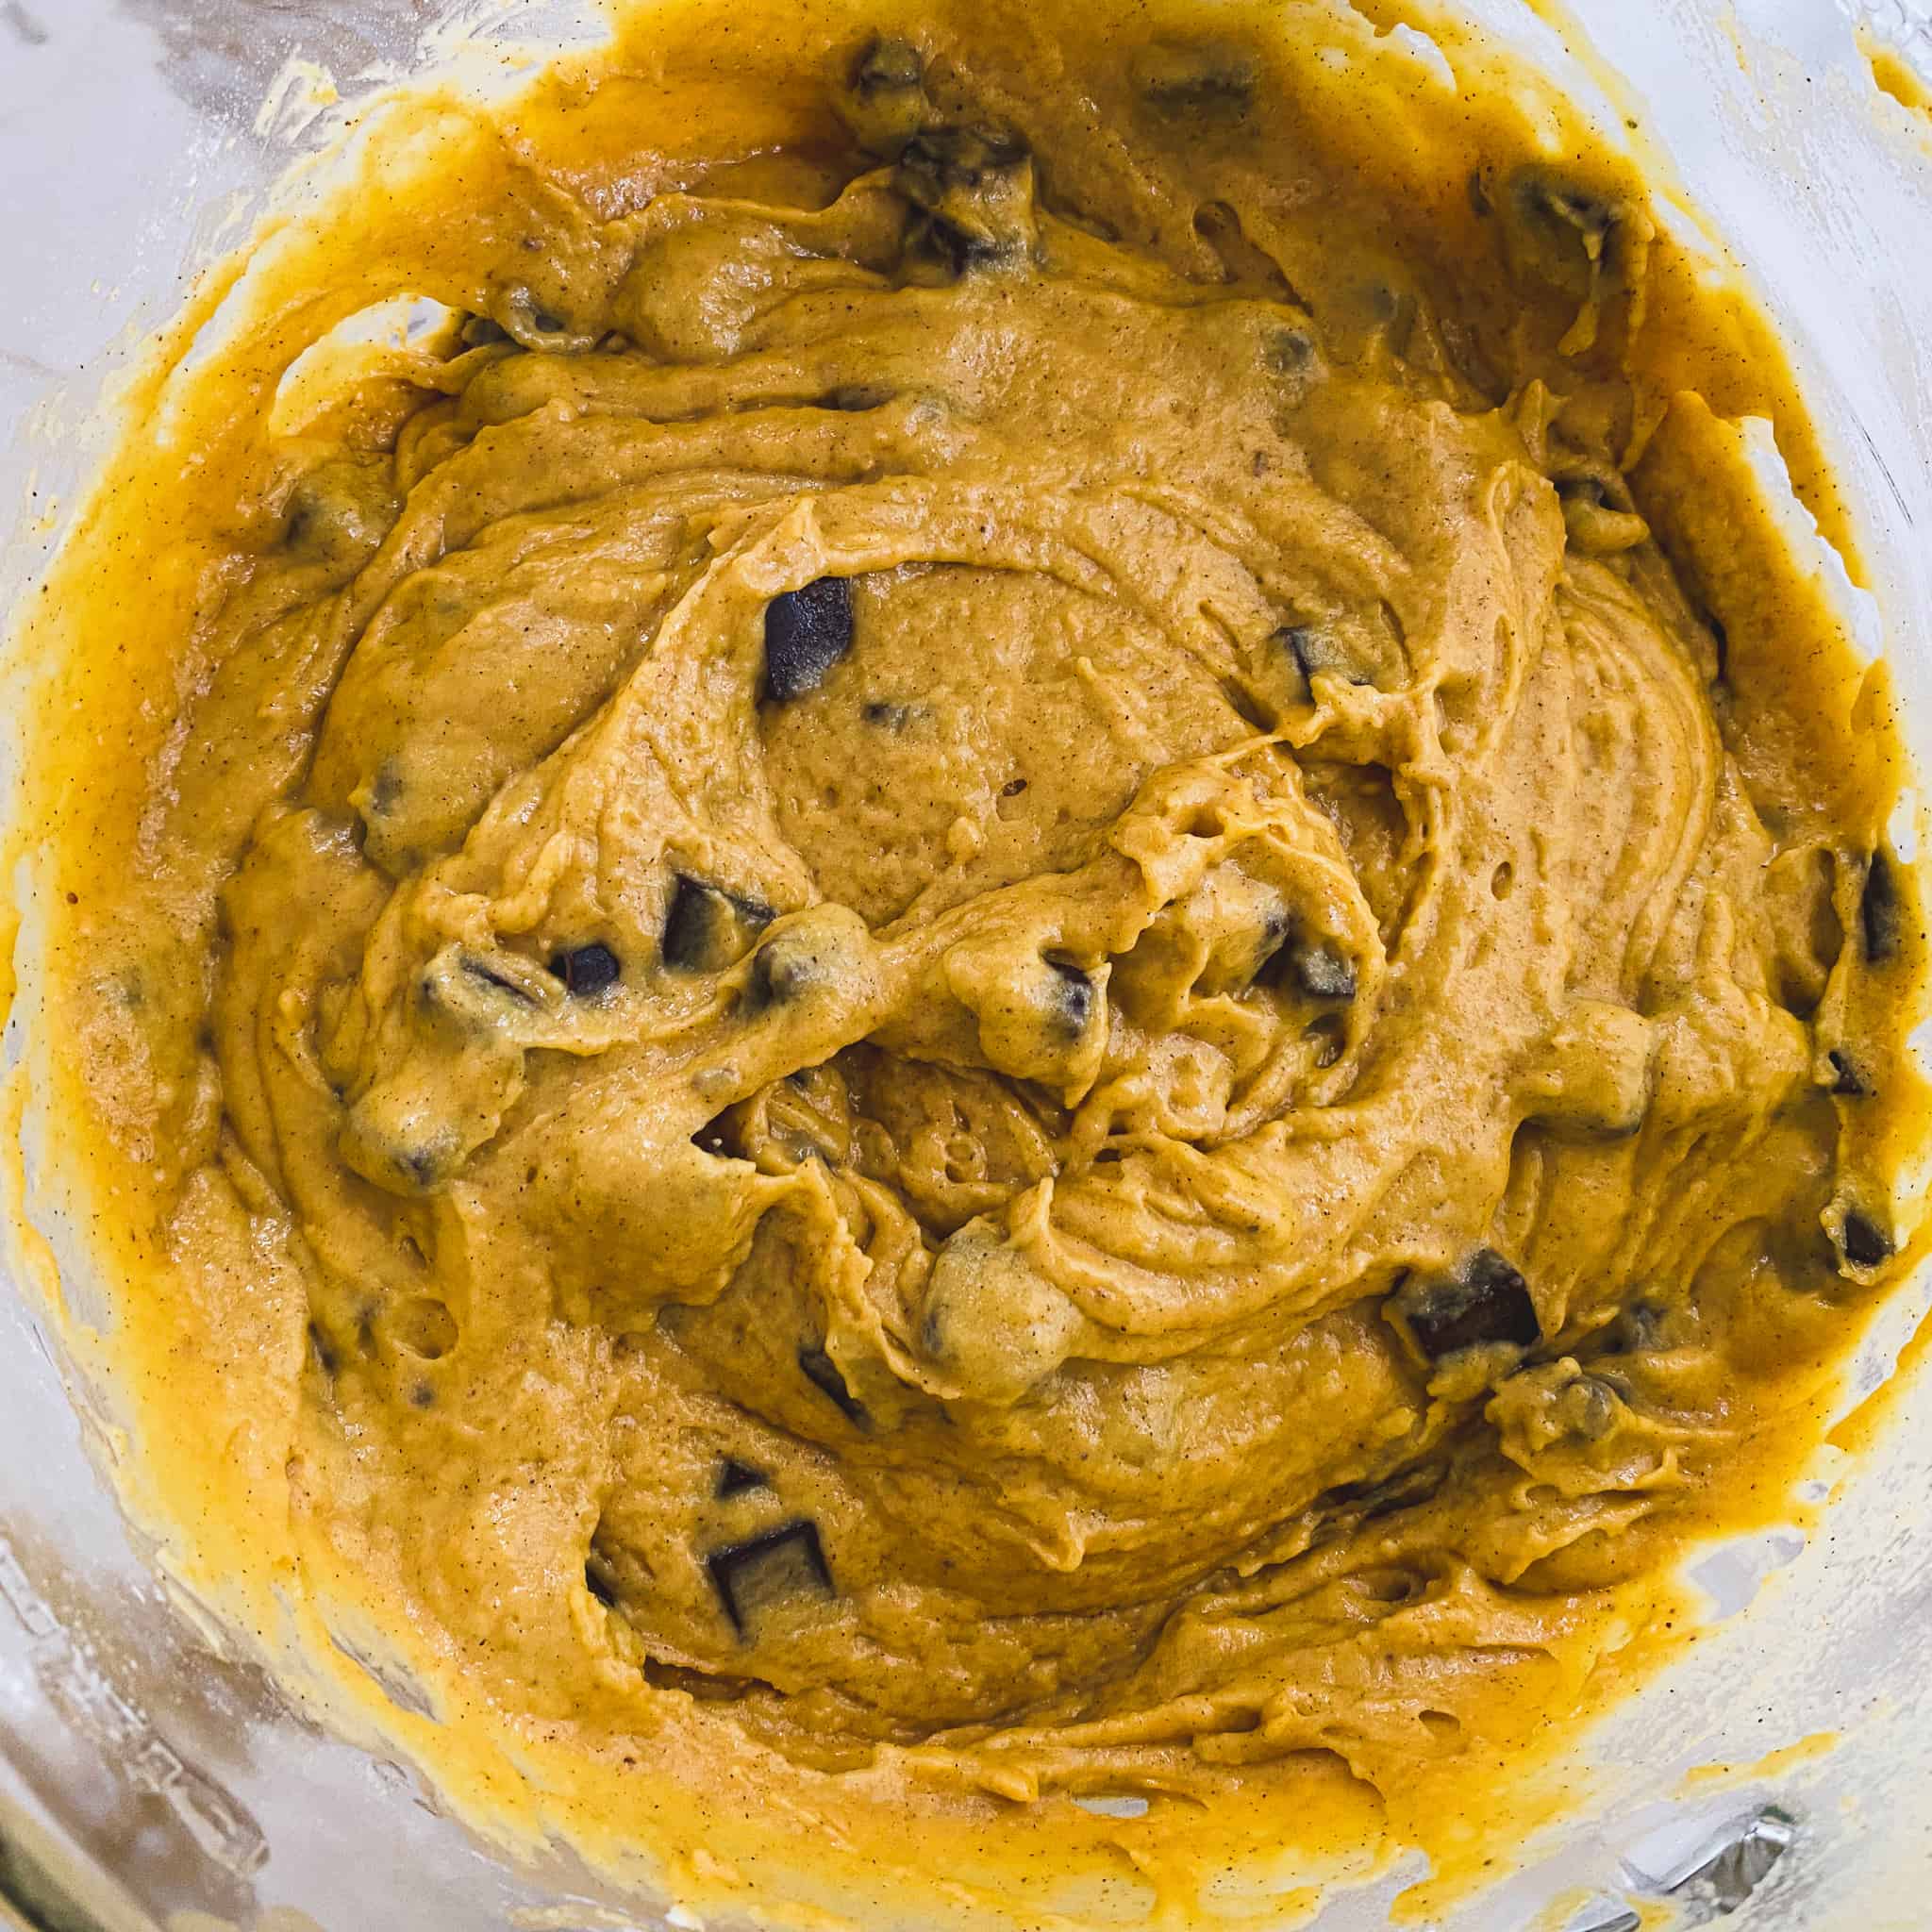 Completed pumpkin chocolate chunk muffin batter.